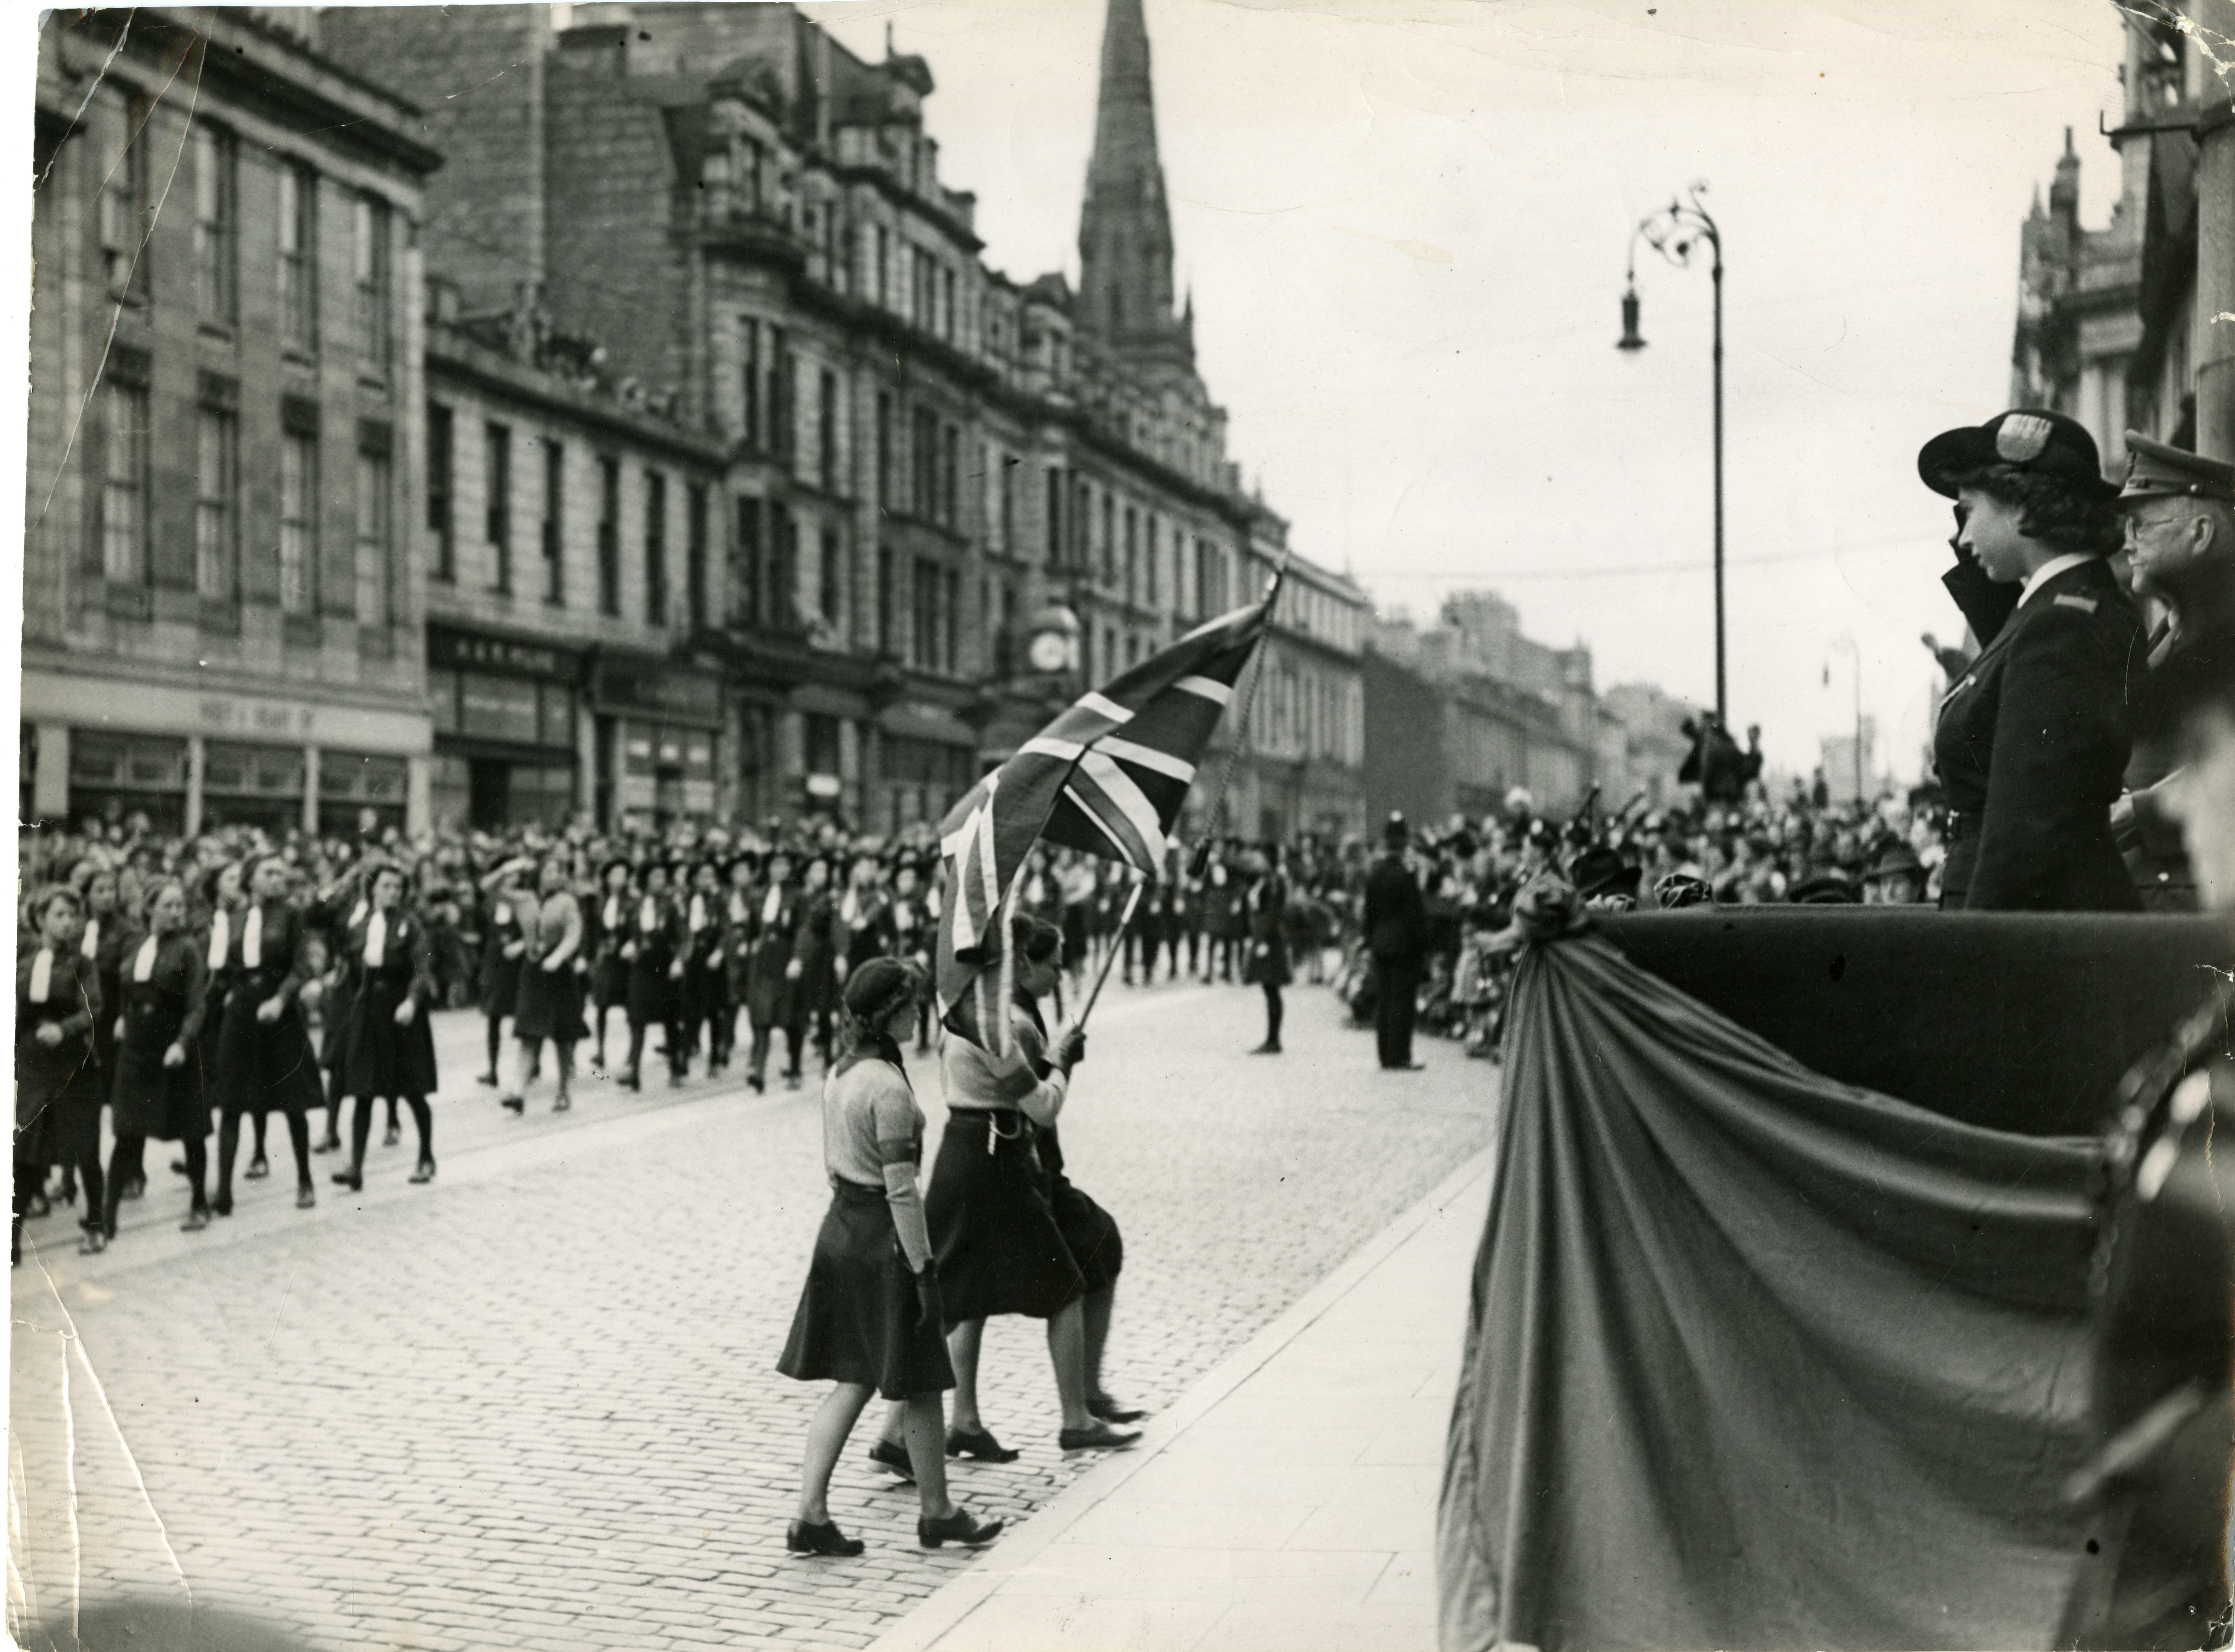 Princess Elizabeth visited Aberdeen to attend the Girl Guides' Rally.